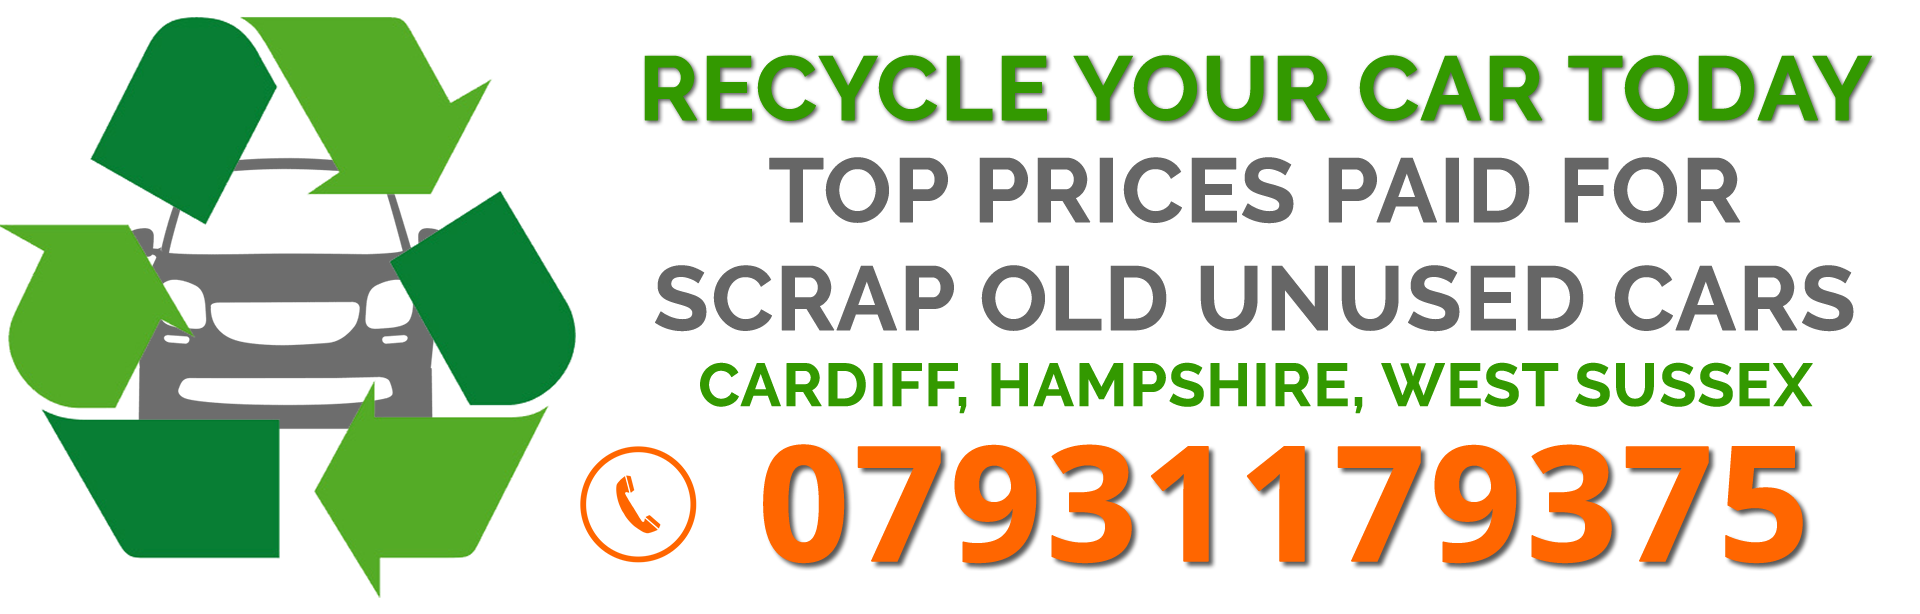 Scrap my car in Hampshire - Best Prices Paid